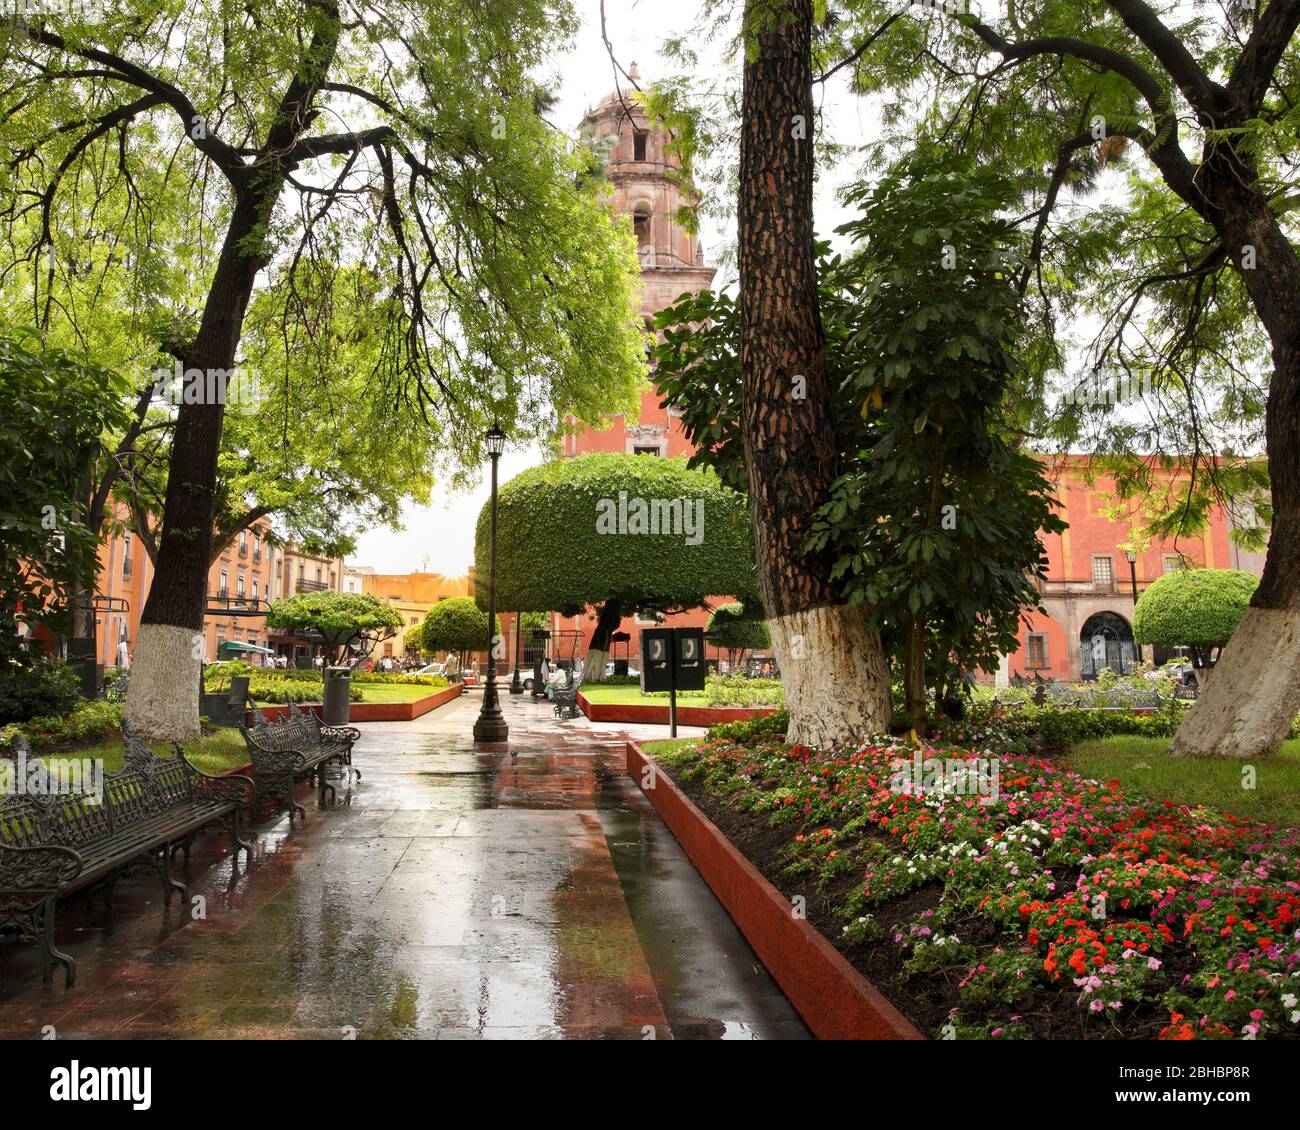 The sun peeks out after a rainy afternoon in the main plaza of Queretaro, Mexico. Stock Photo